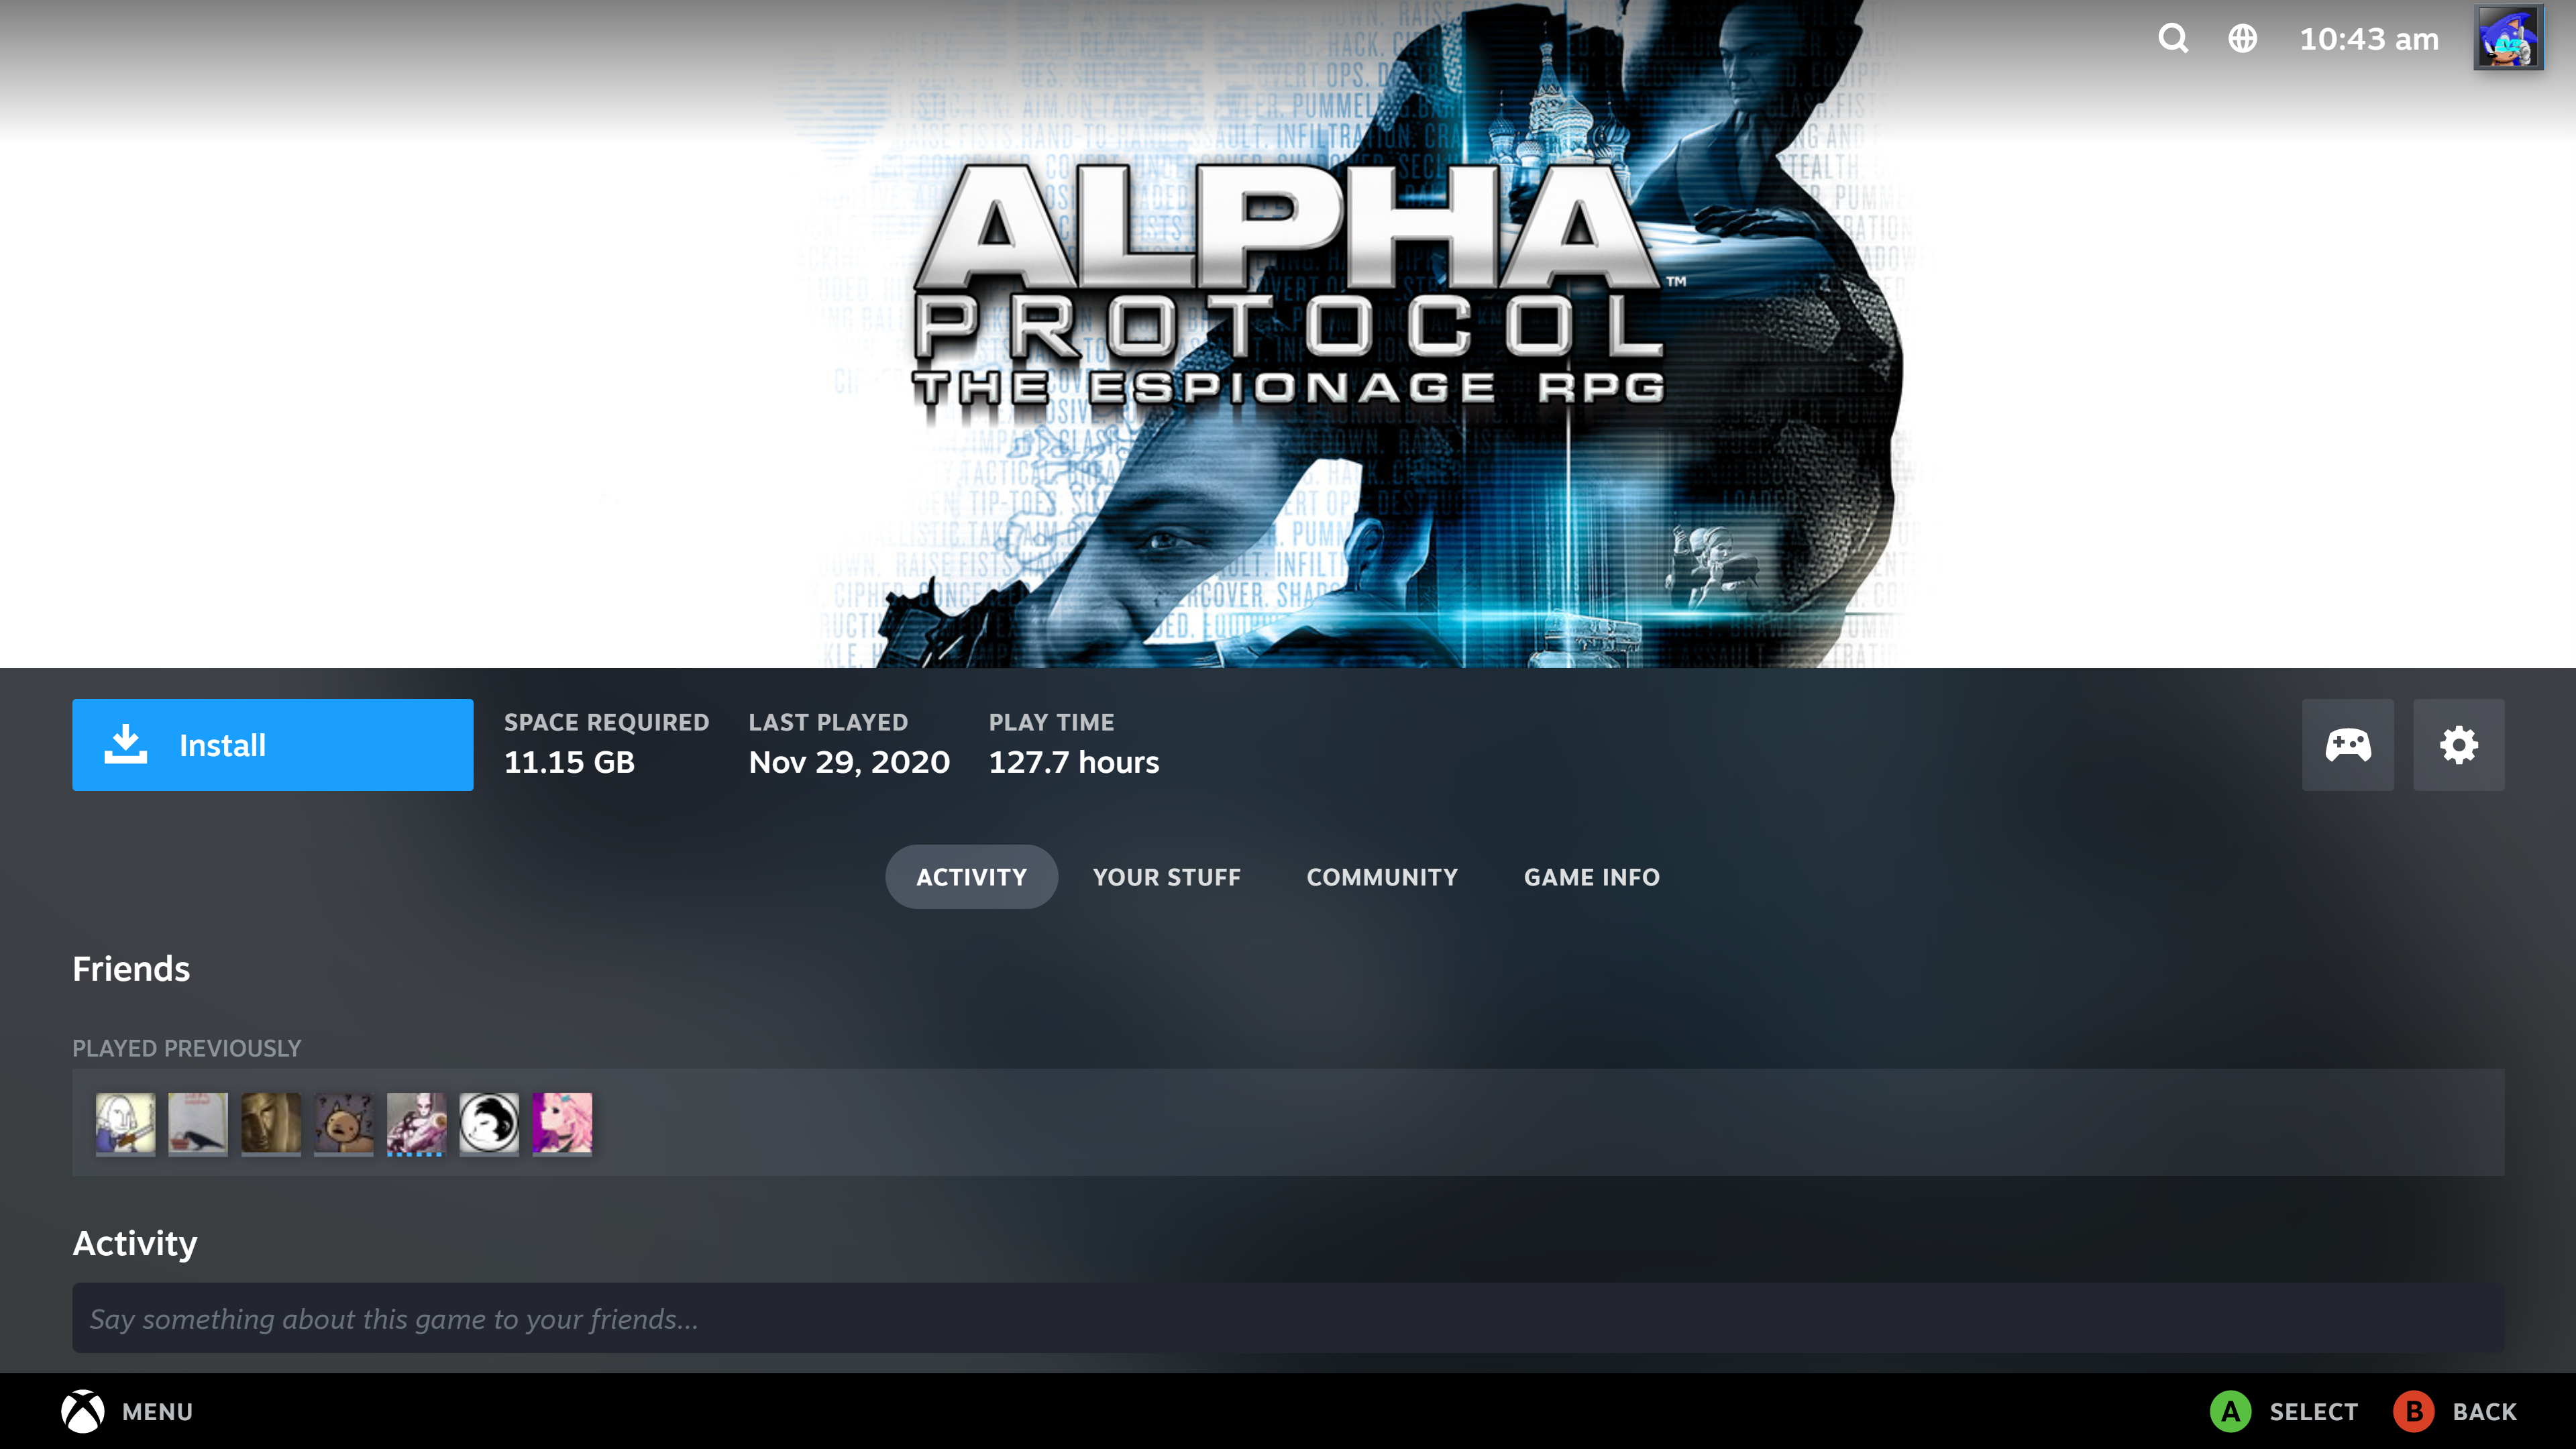 A screen showing the option to install Alpha Protocol in the new Big Picture UI for Steam, with the game size listed before installation begins.